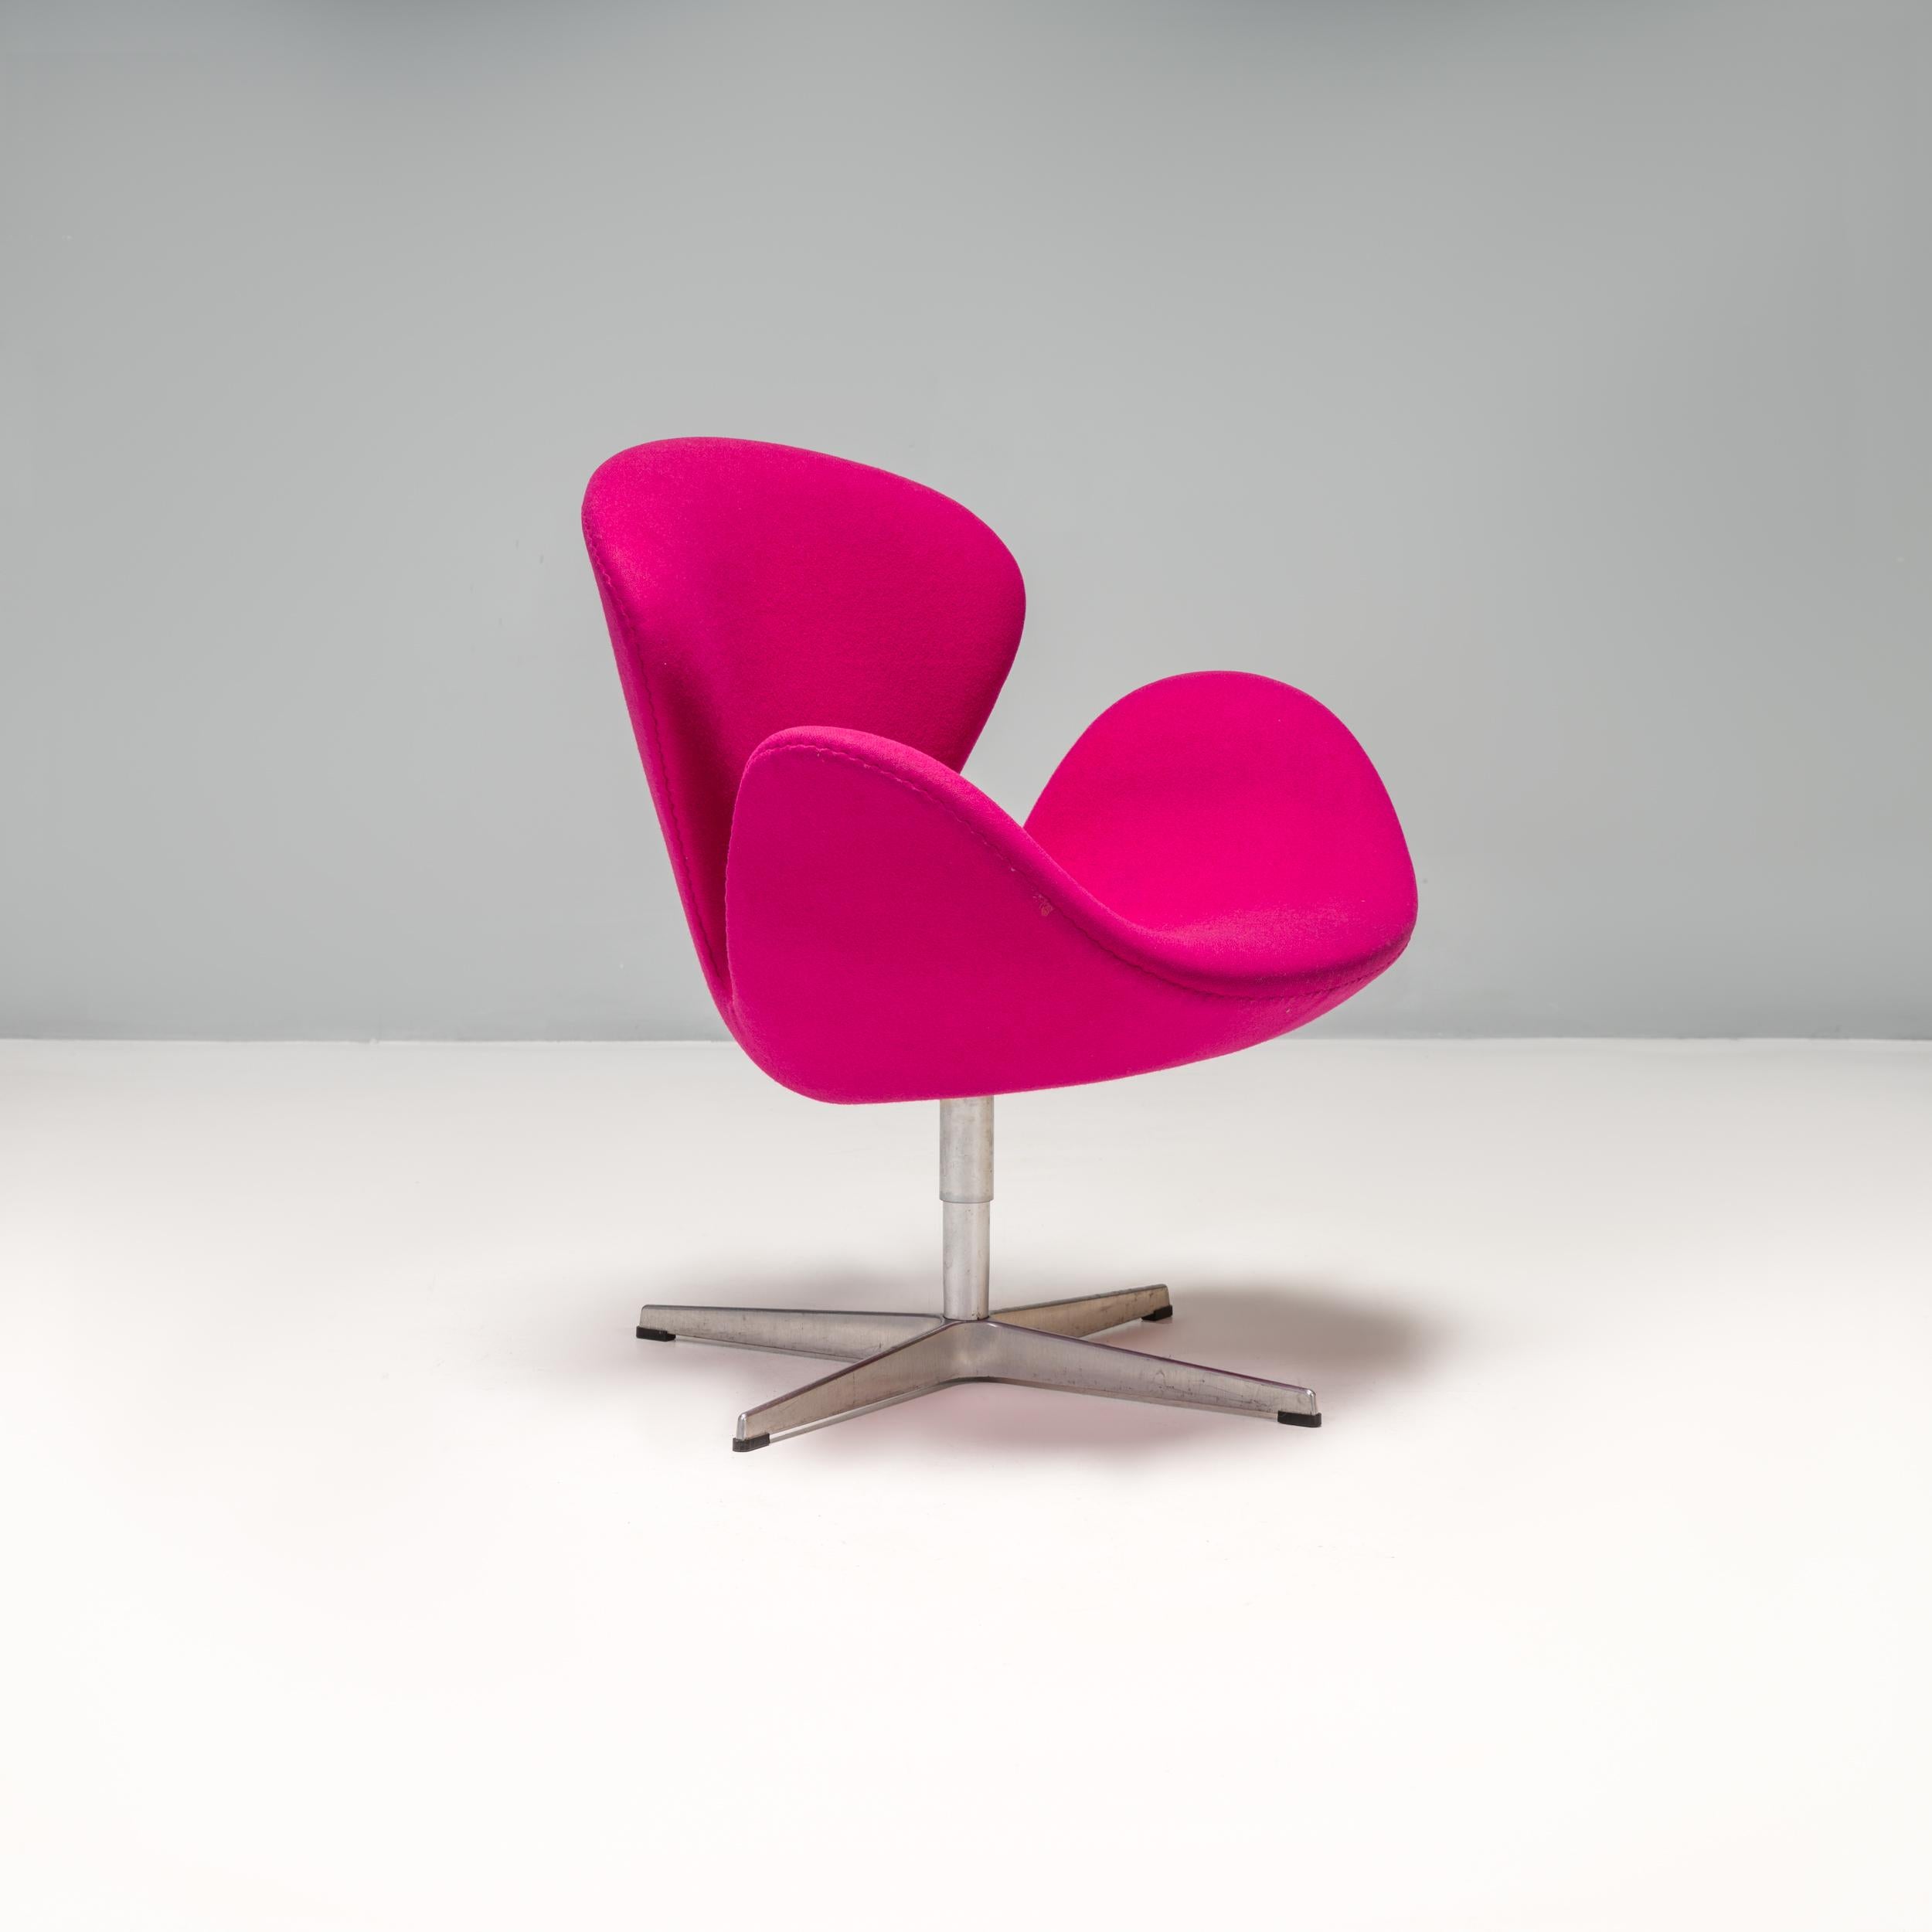 Originally designed by Arne Jacobsen in 1958 for the SAS Royal Hotel in Copenhagen, the swan armchair was groundbreaking at the time and has gone on to become a true classic.

The curvaceous silhouette creates an enveloping seat with integrated